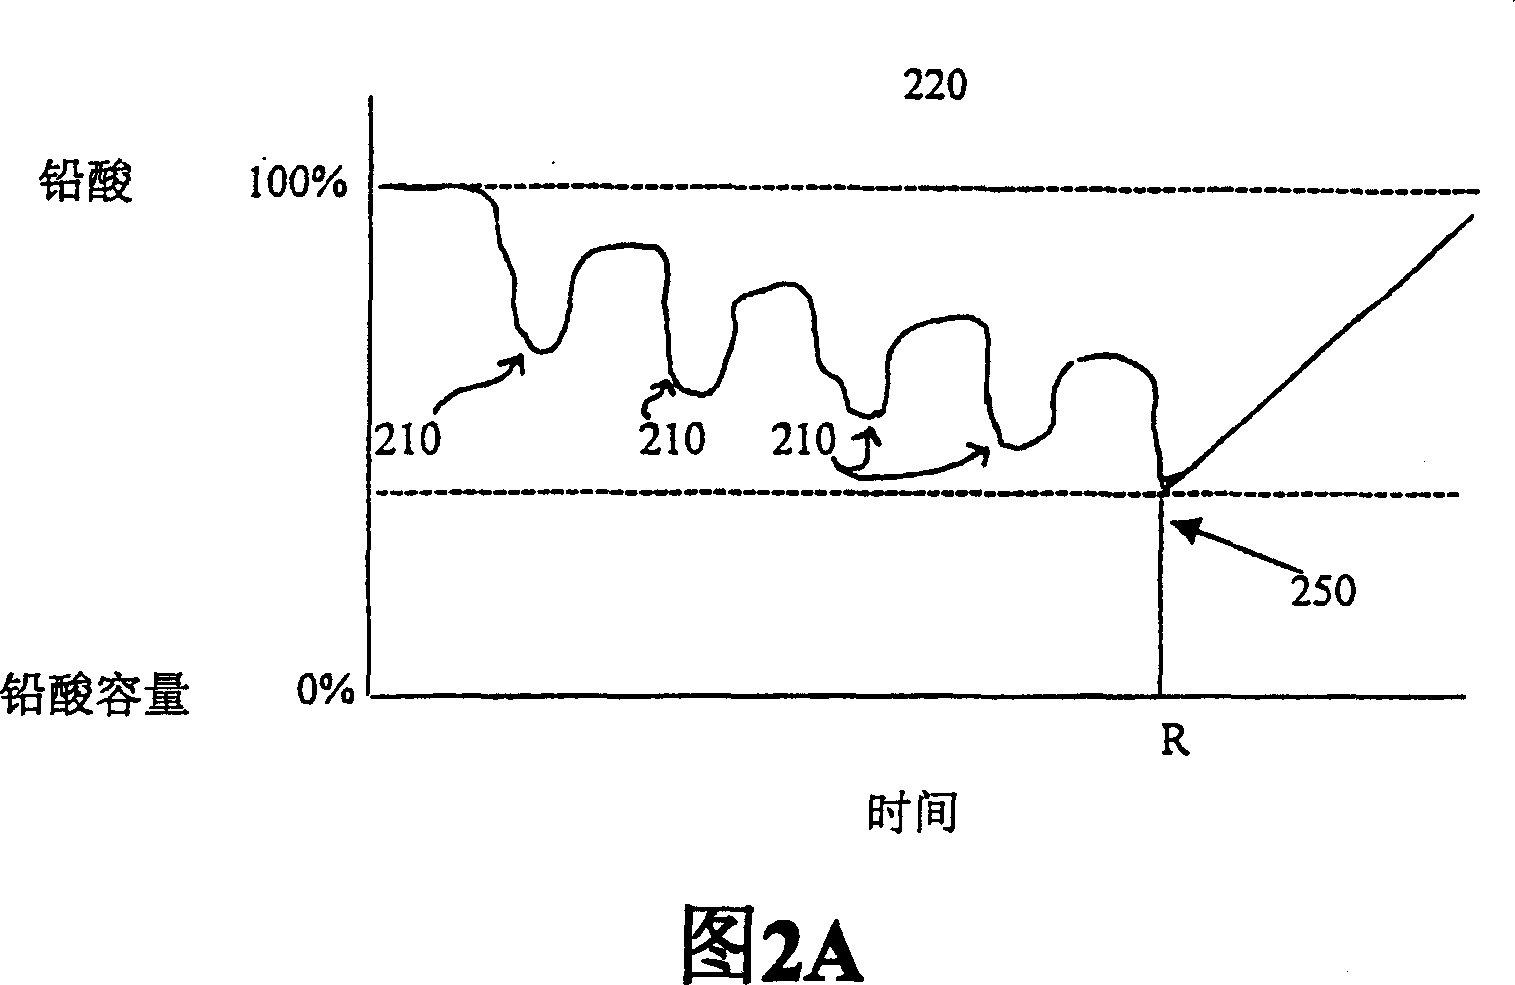 Energy storage device for loads having variable power rates